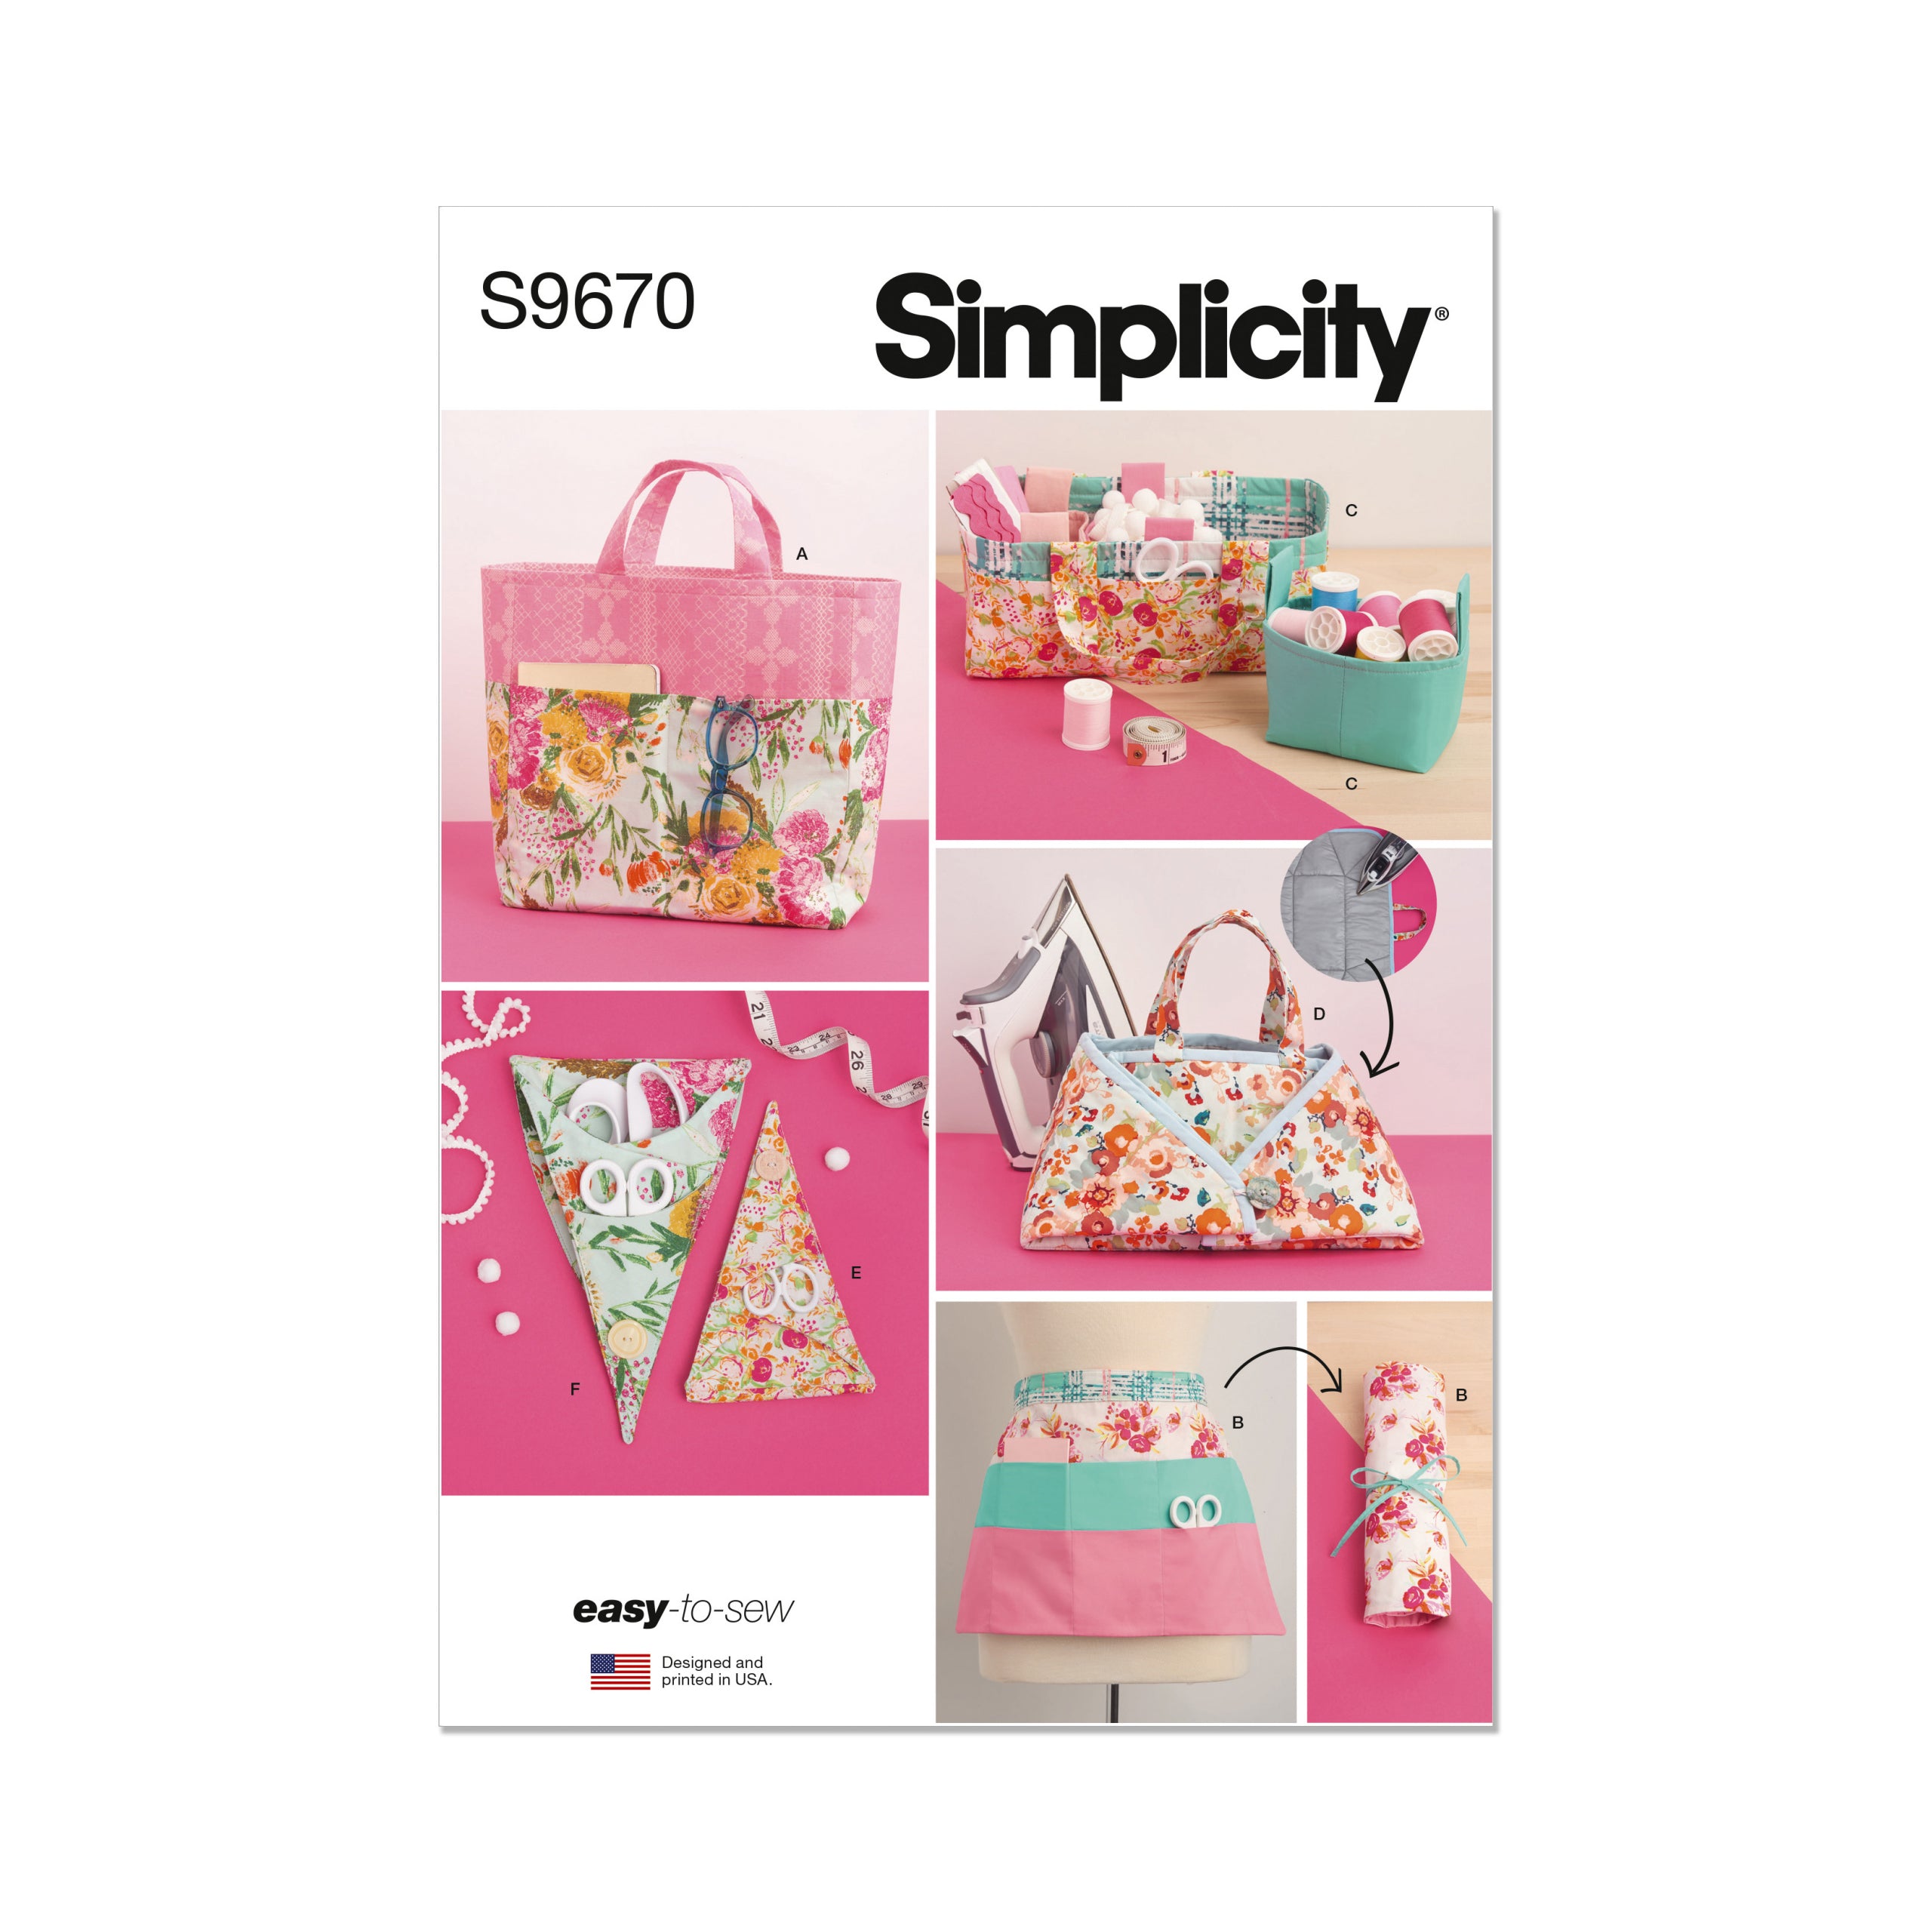 Simplicity Sewing Room Accessories S9670